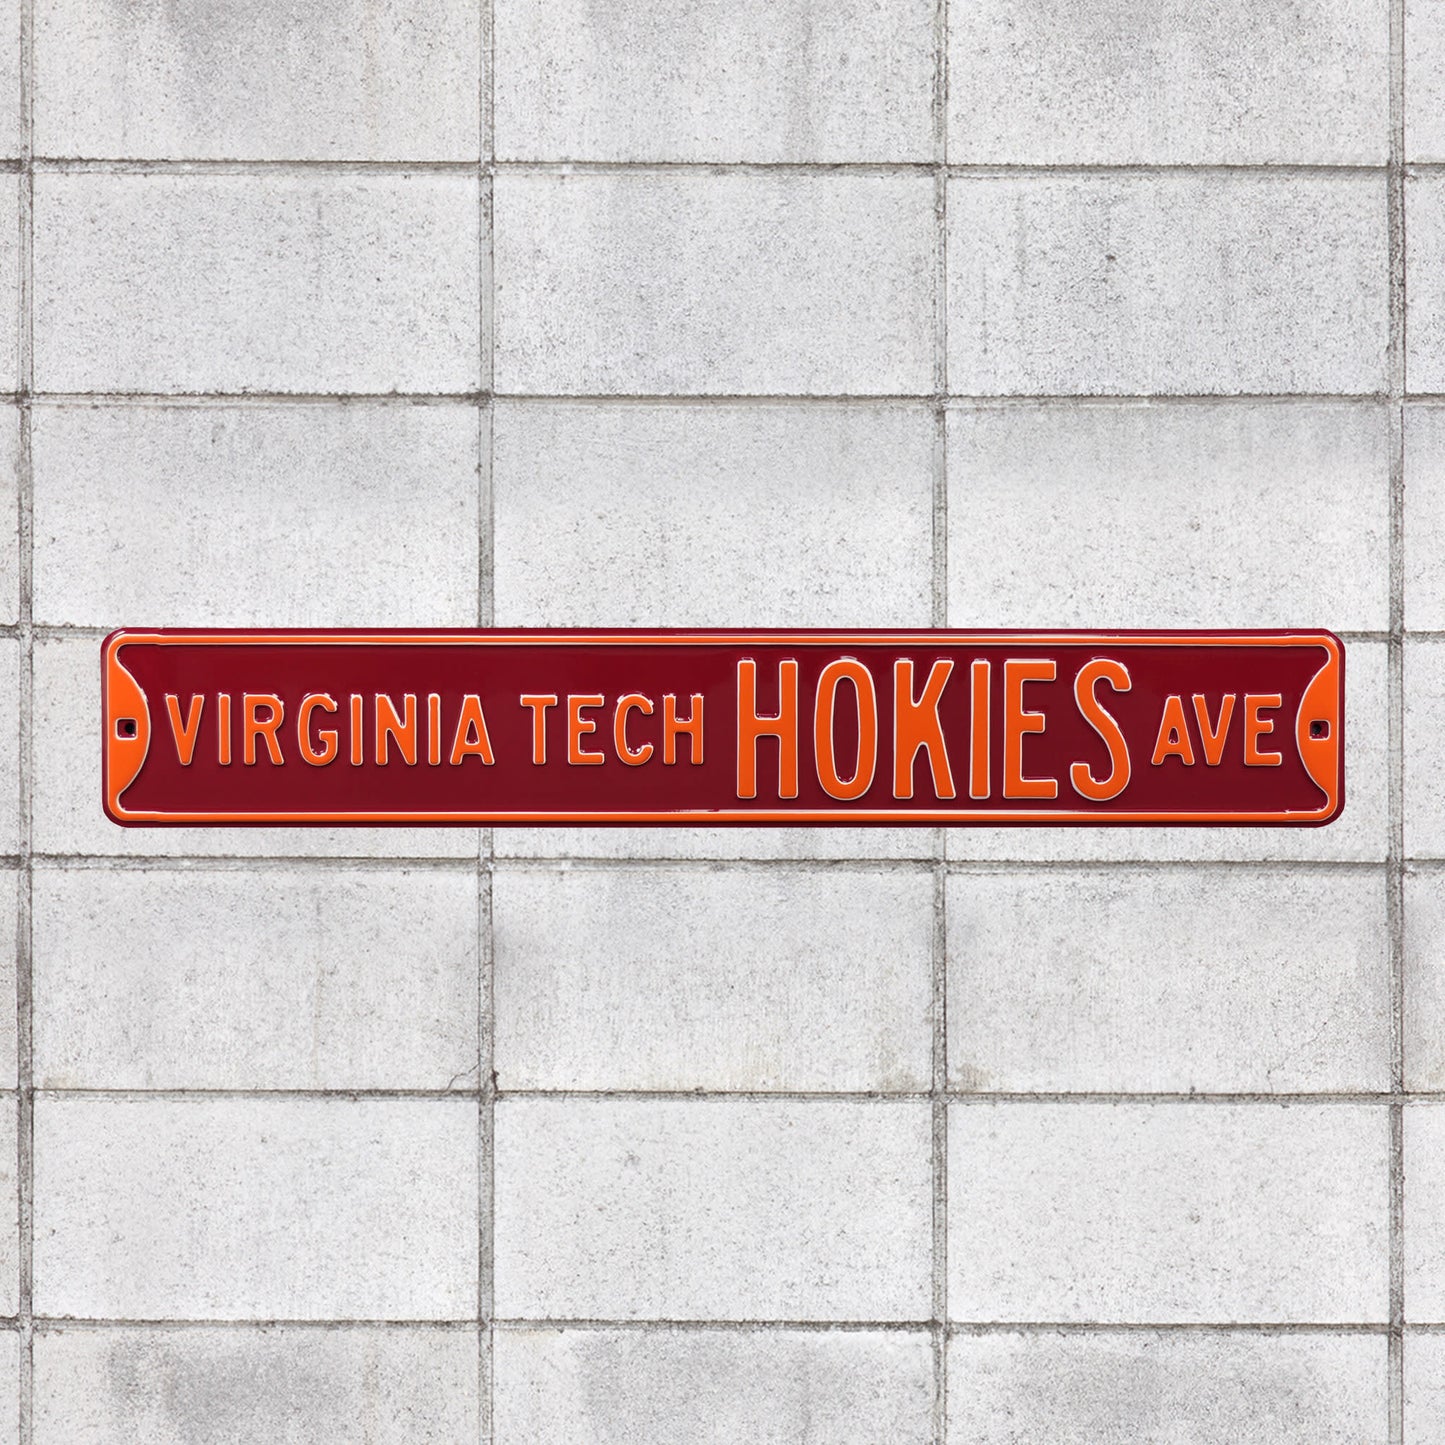 Virginia Tech Hokies: Virginia Tech Hokies Avenue - Officially Licensed Metal Street Sign